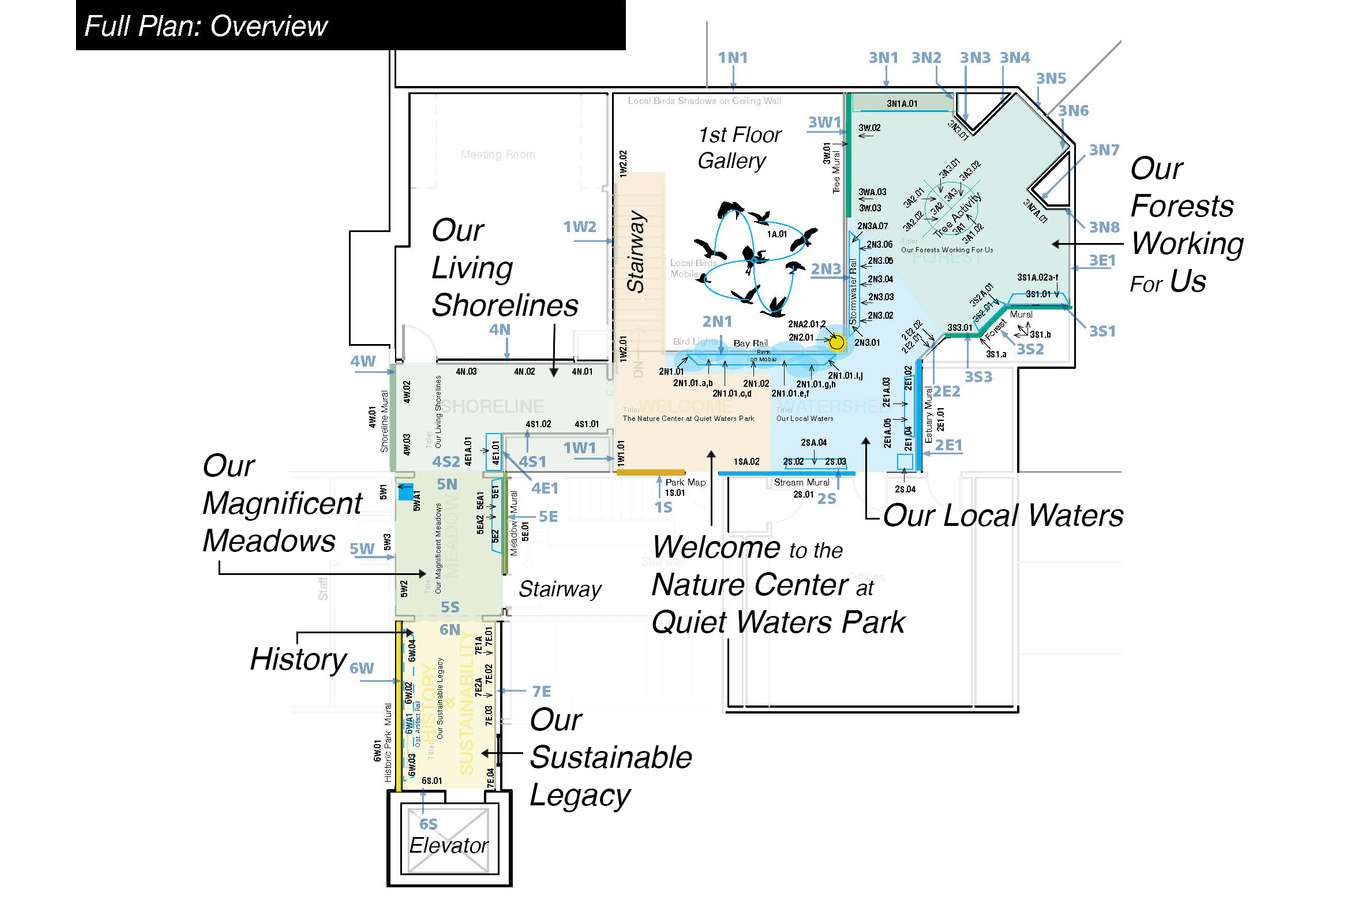 3 QWP MB web 03 : Schematic Floorpan showing graphic layout, key murals and thematic areas. 